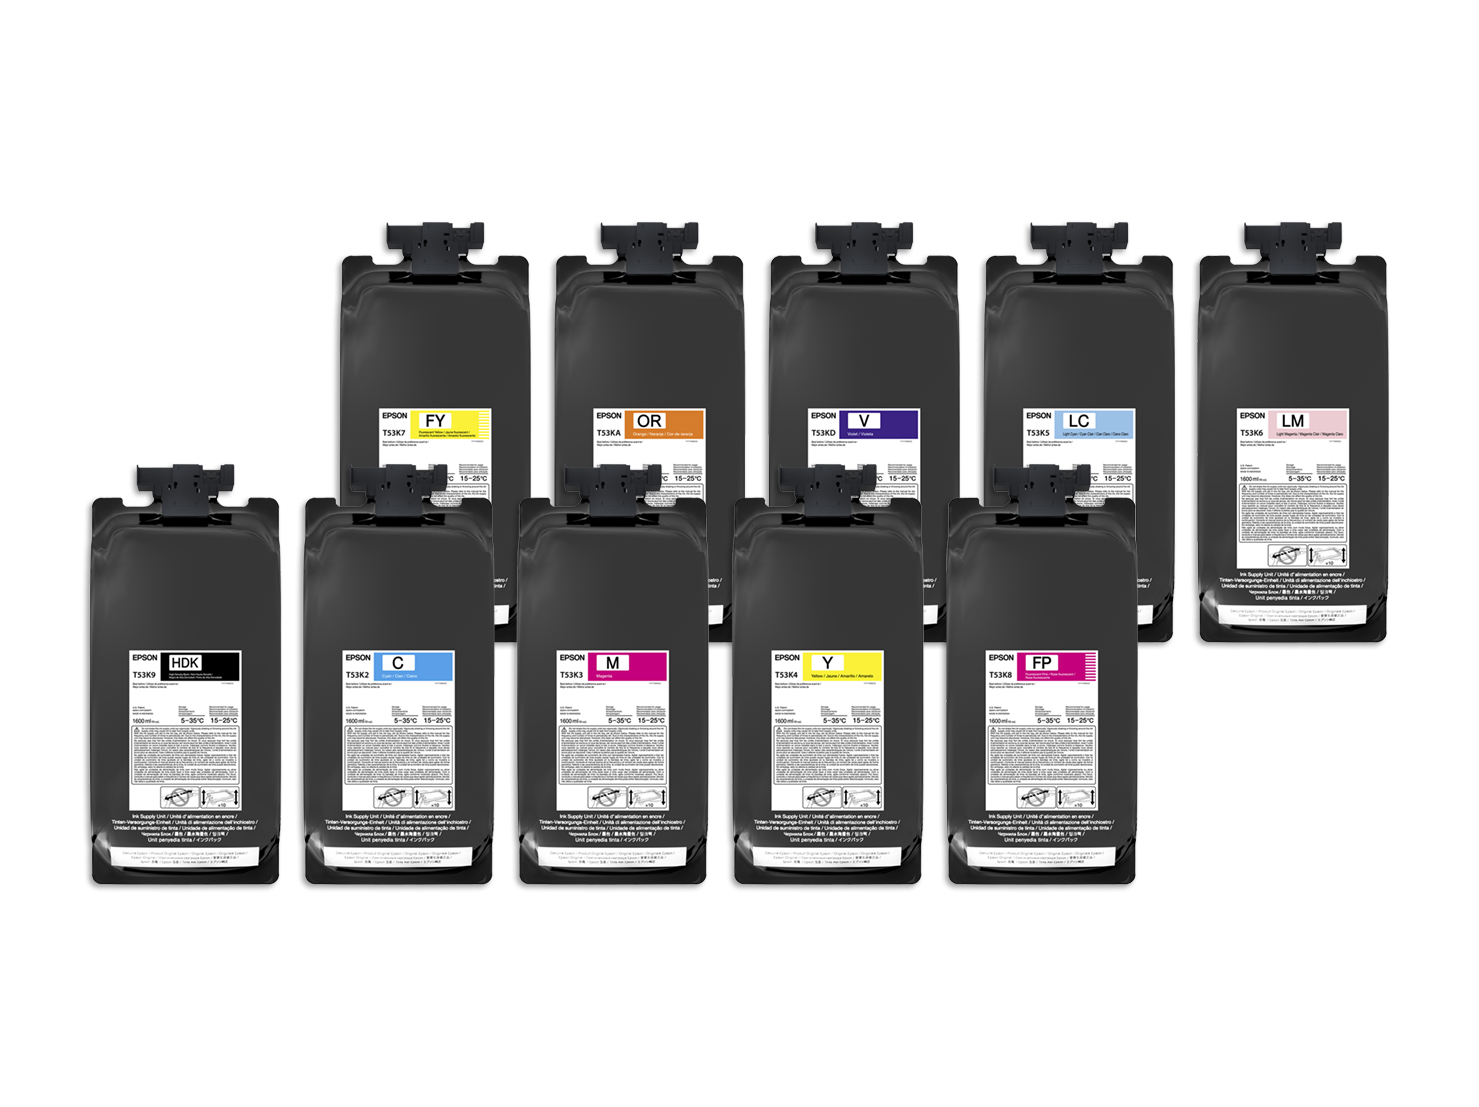 UltraChrome DS ink cartridges
